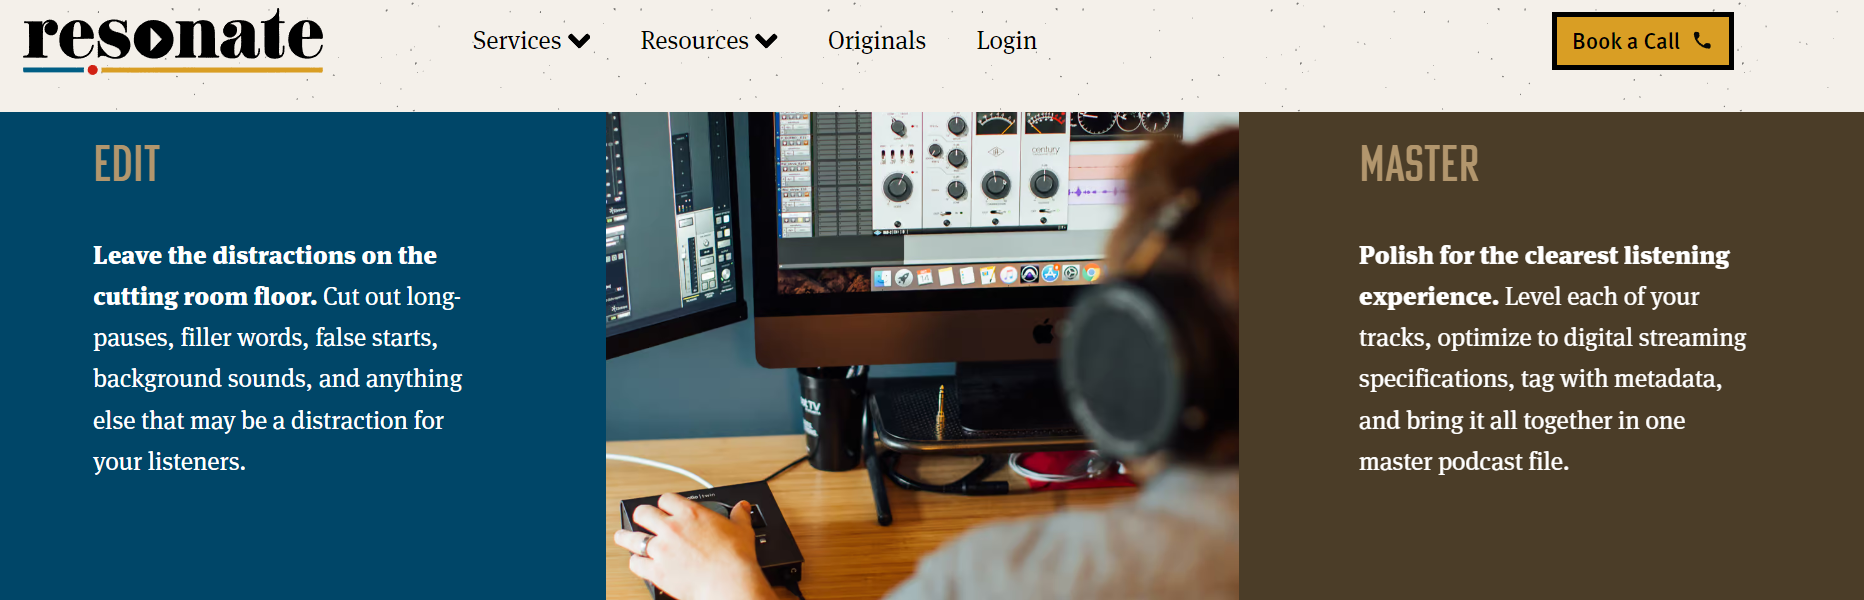 Resonate Recordings podcast editing company homepage